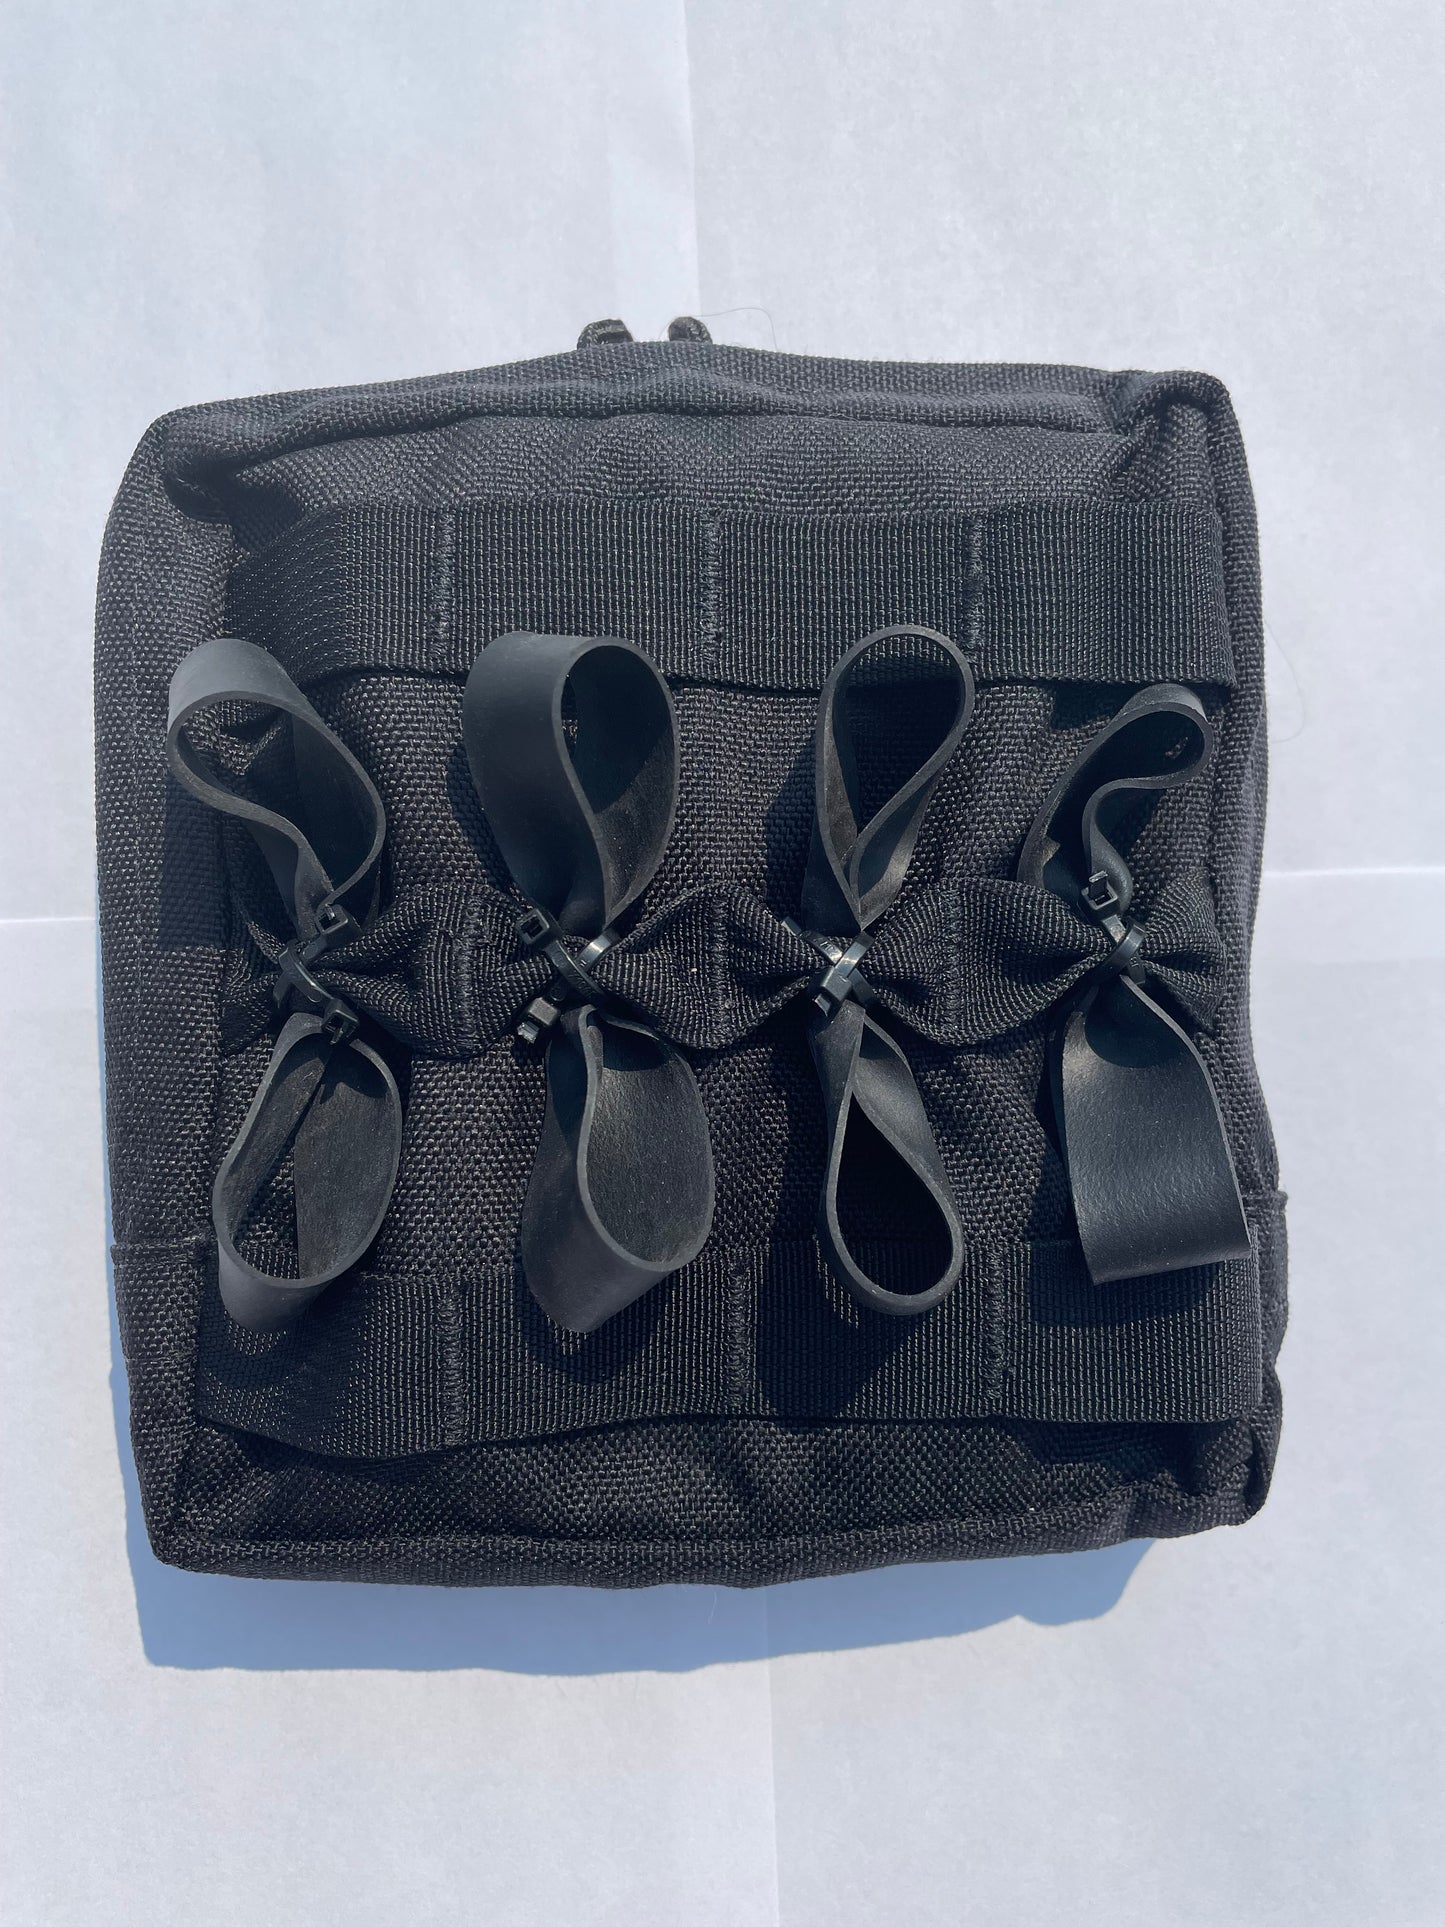 Universal Molle Webbing Attachment Kit - 10 Pack